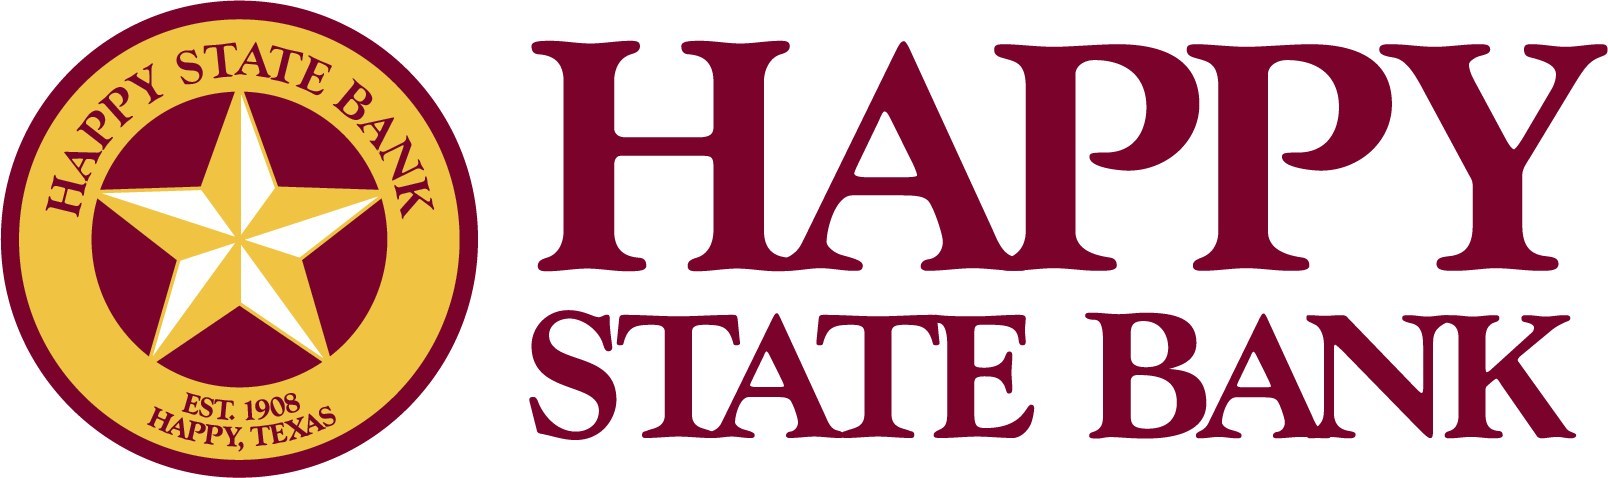 With over $5 billion in assets, Happy State Bank was founded in 1908 in Happy, Texas and today is headquartered in Amarillo, Texas. Happy State Bank offers a broad range of financial services and products through its network of 57 locations in 41 communities across the Texas Panhandle, South Plains, Austin, Central Texas and the Dallas/Fort Worth Metroplex. Happy State Bank can be found online at www.HappyBank.com.